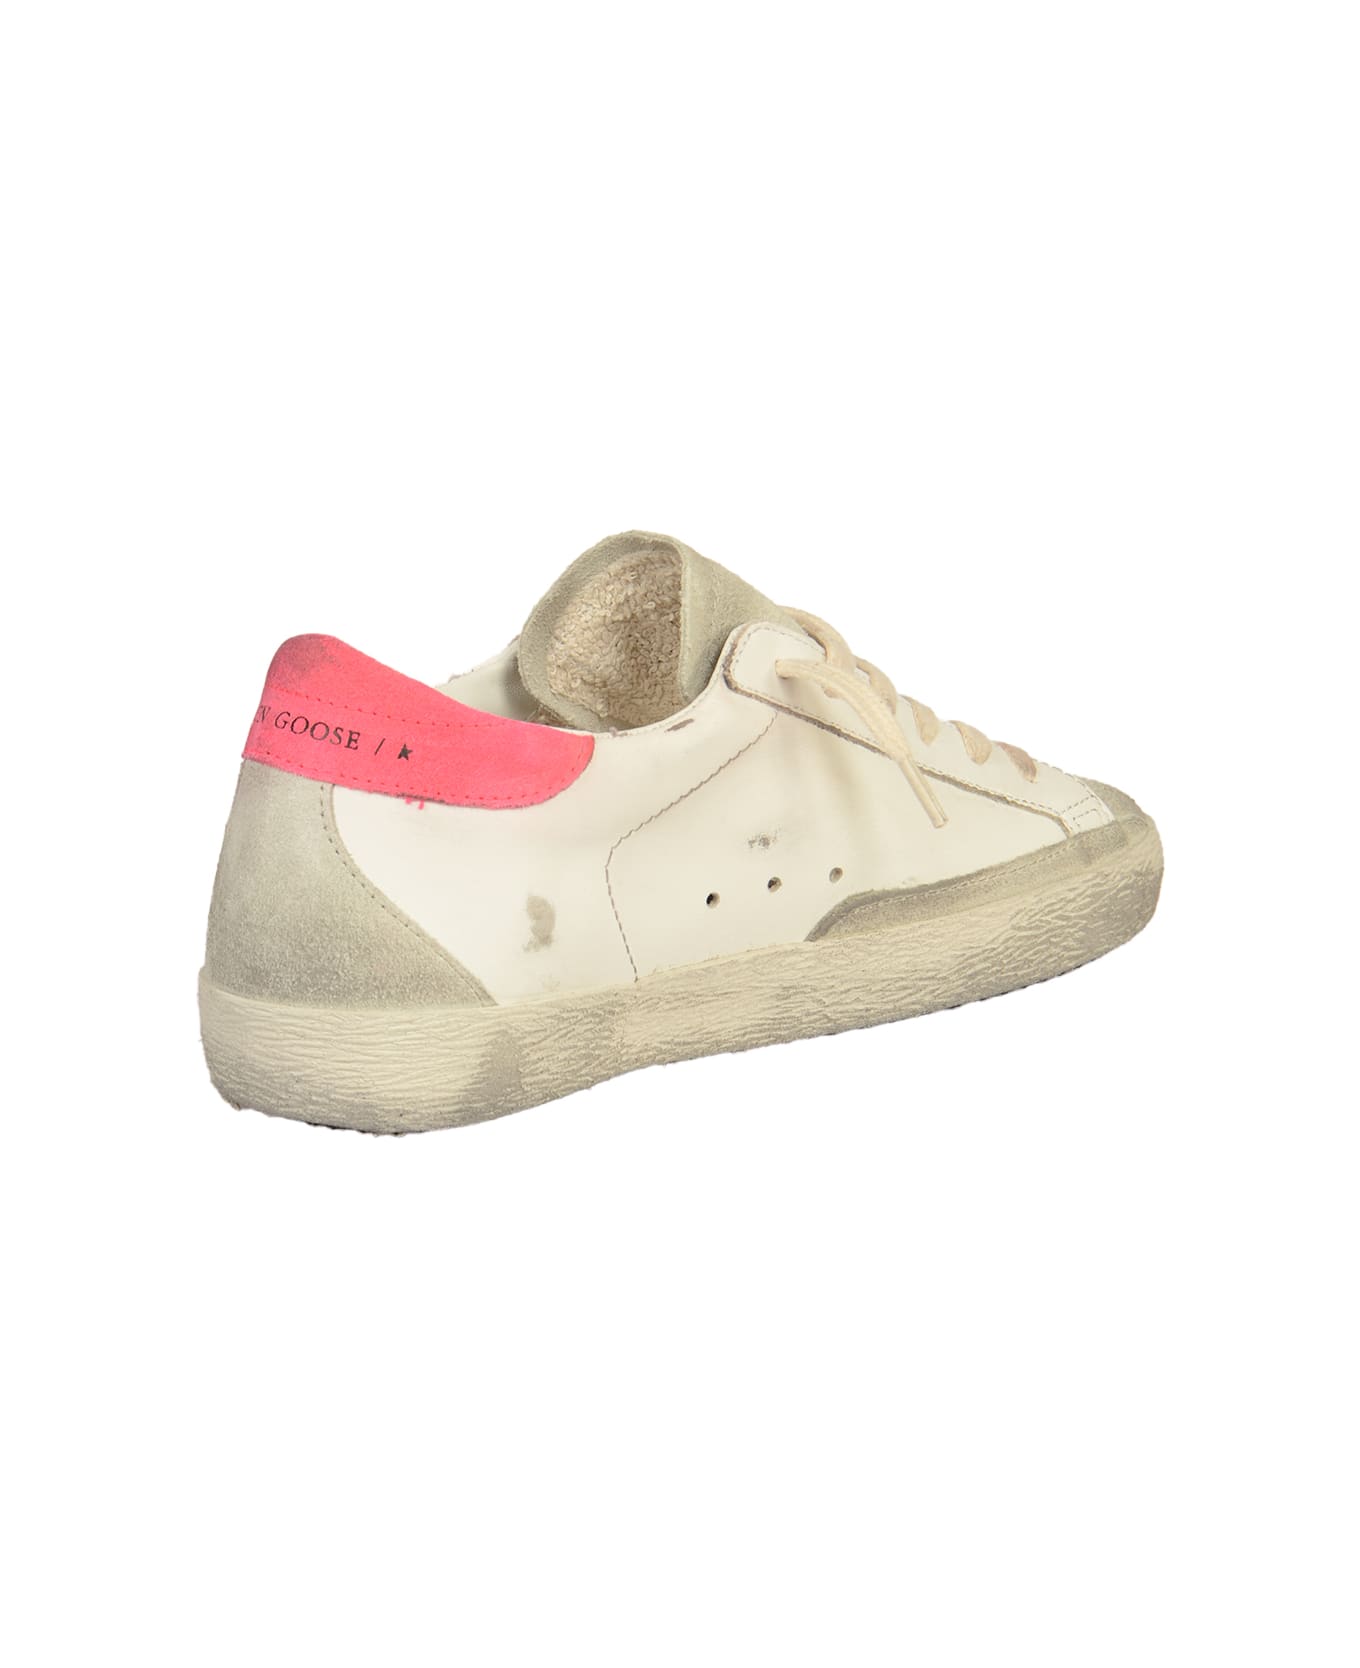 Golden Goose Super-star Classic Sneakers - White/Ice/Silver